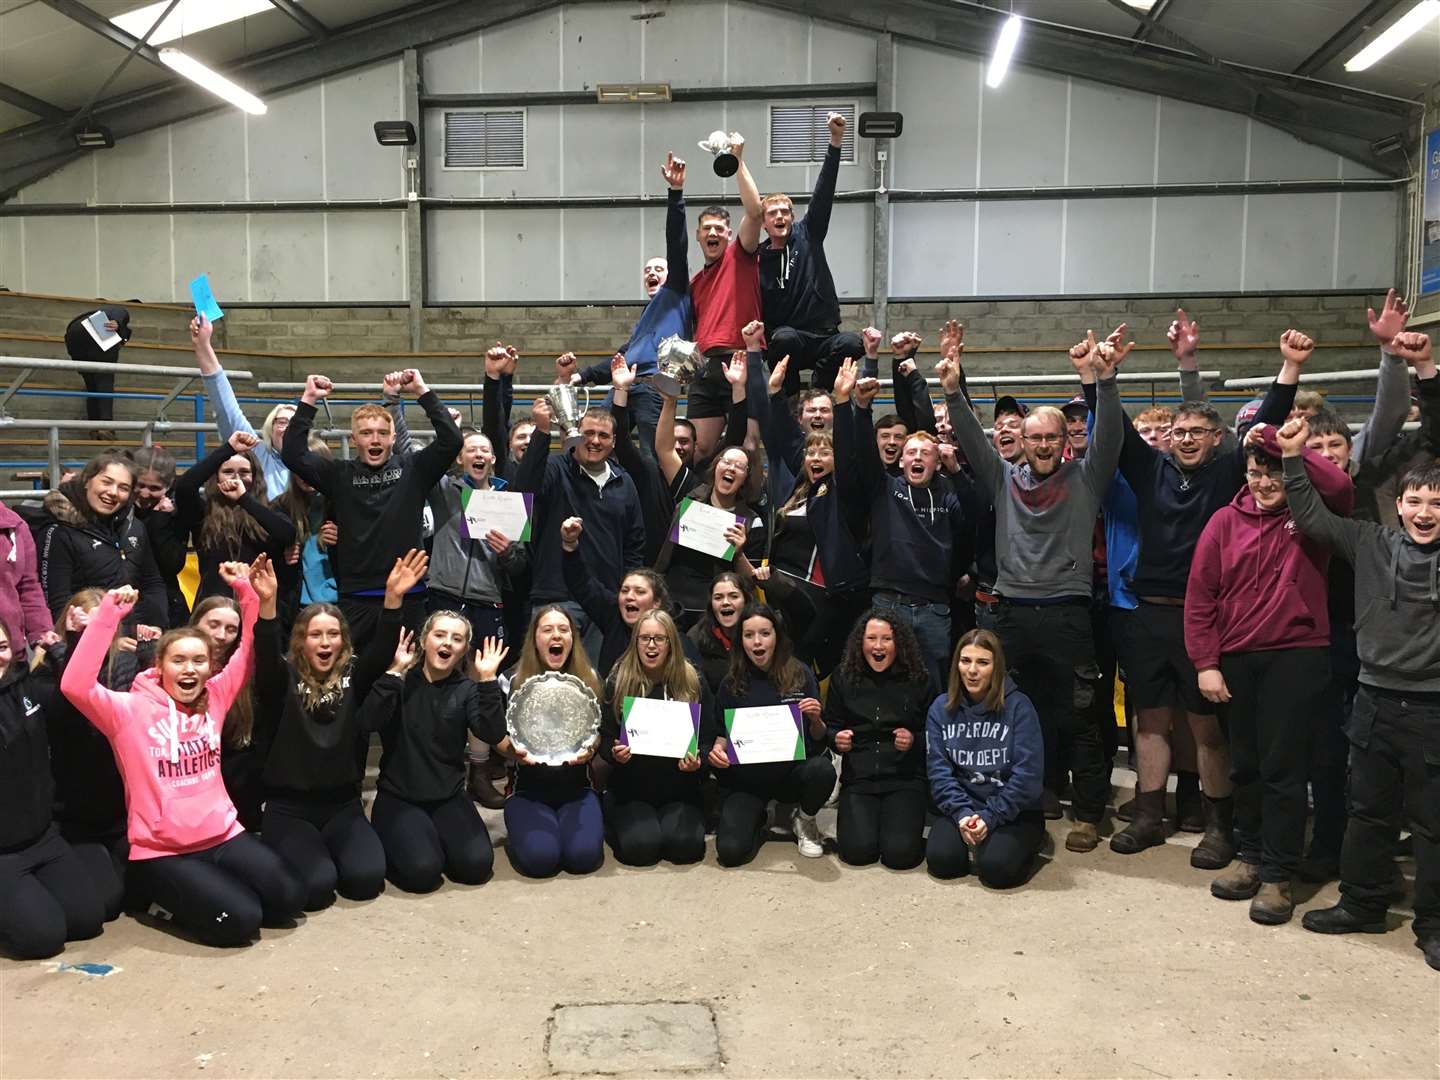 Bower Young Farmers Club members celebrating their win in the Highland Rally held by the Scottish Association of Young Farmers Clubs.